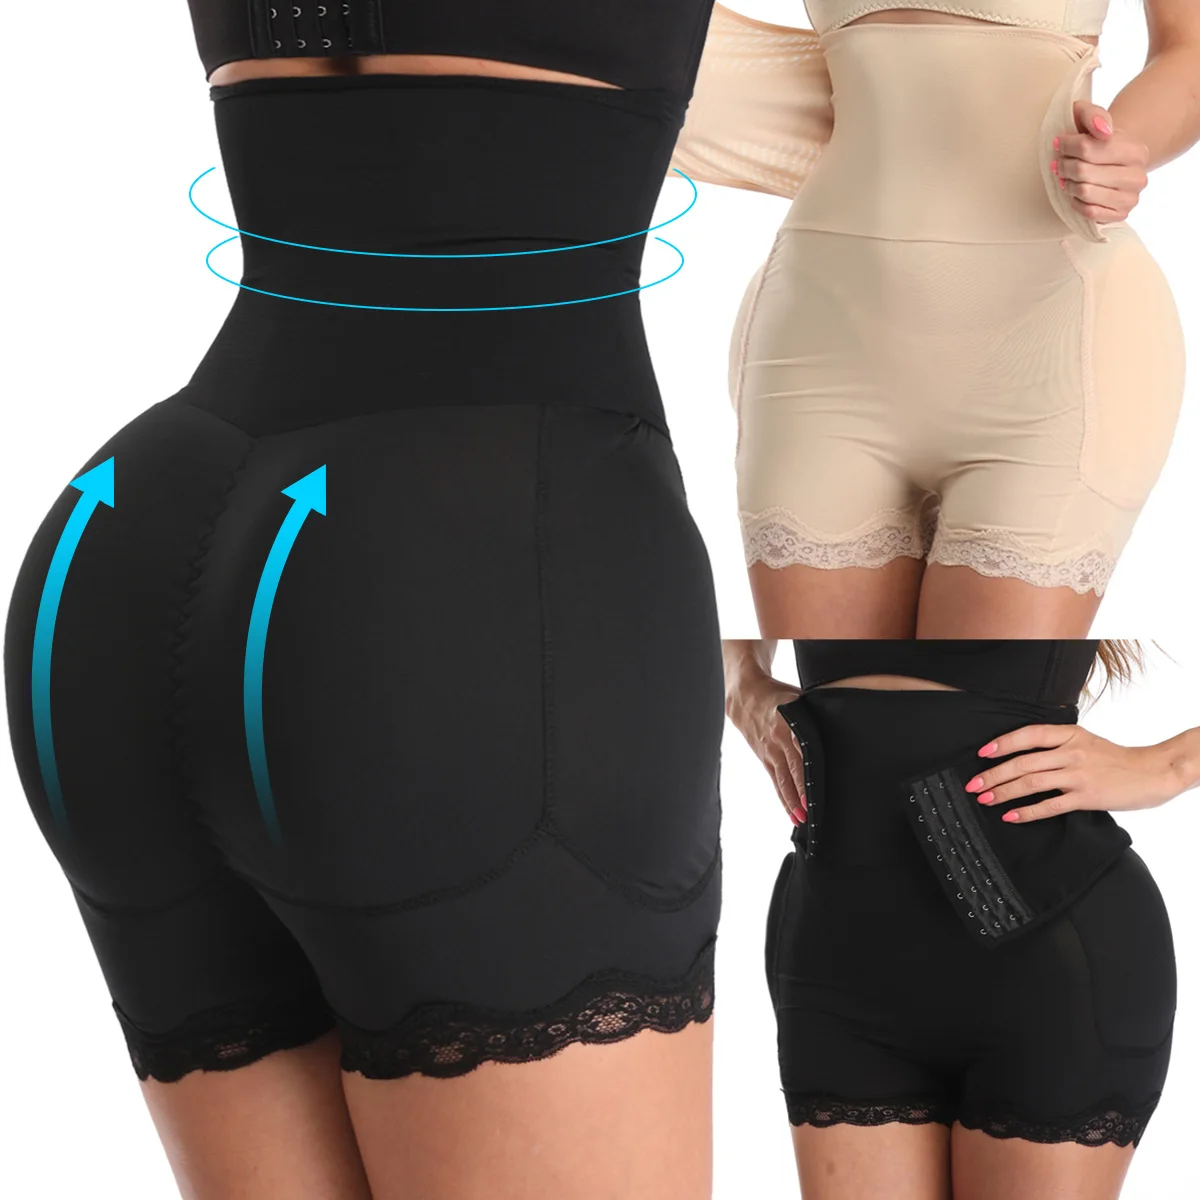 

Private Label High Waist Plus Size Hip Enhancer Body Shapewear Women Padded Thigh Slimmer Butt Lifter Tummy Control Pants, Black,nude